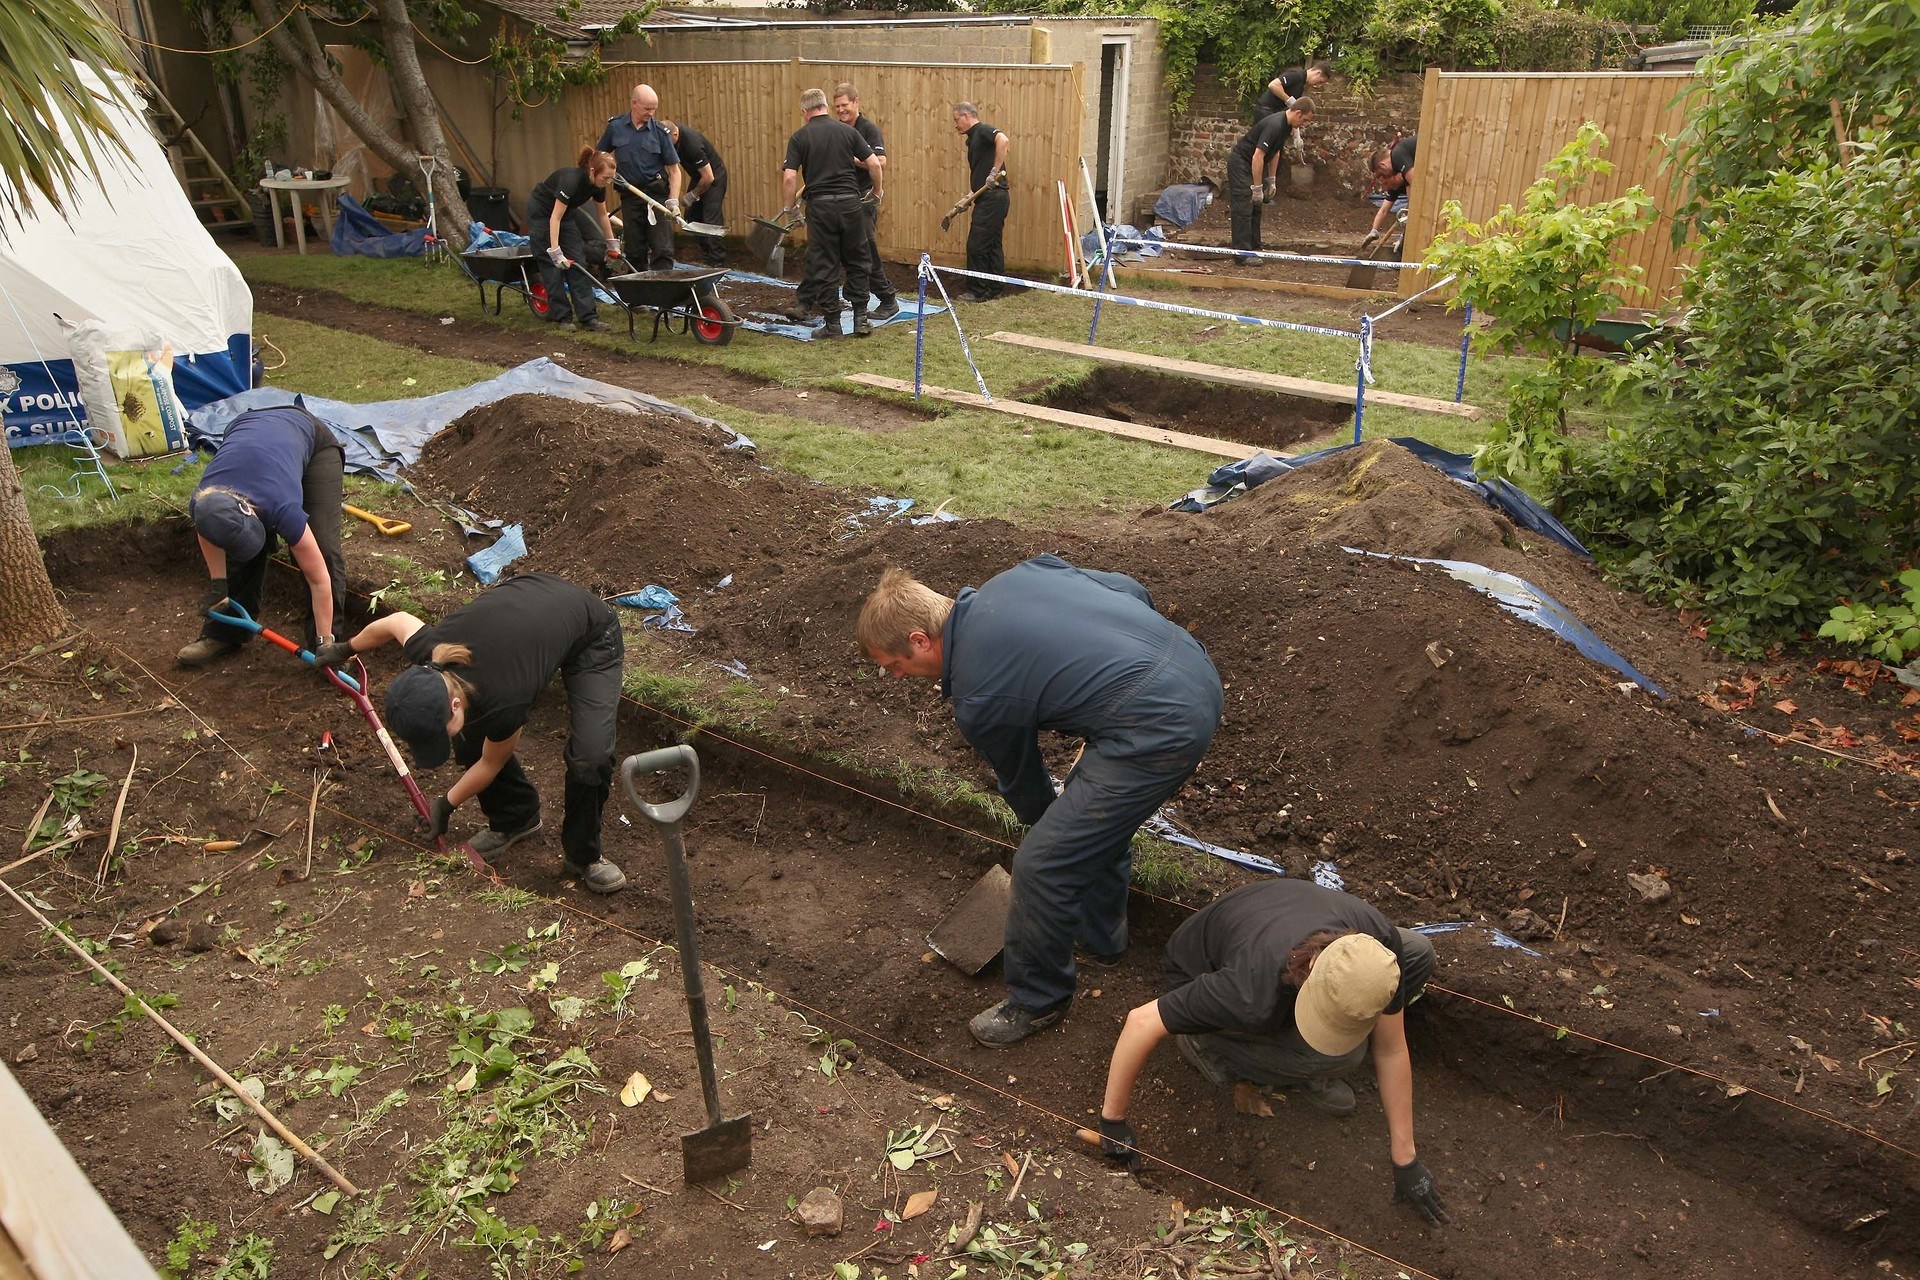 Police search the garden of a property where Peter Tobin lived in Portslade on July 14, 2010 near Brighton.